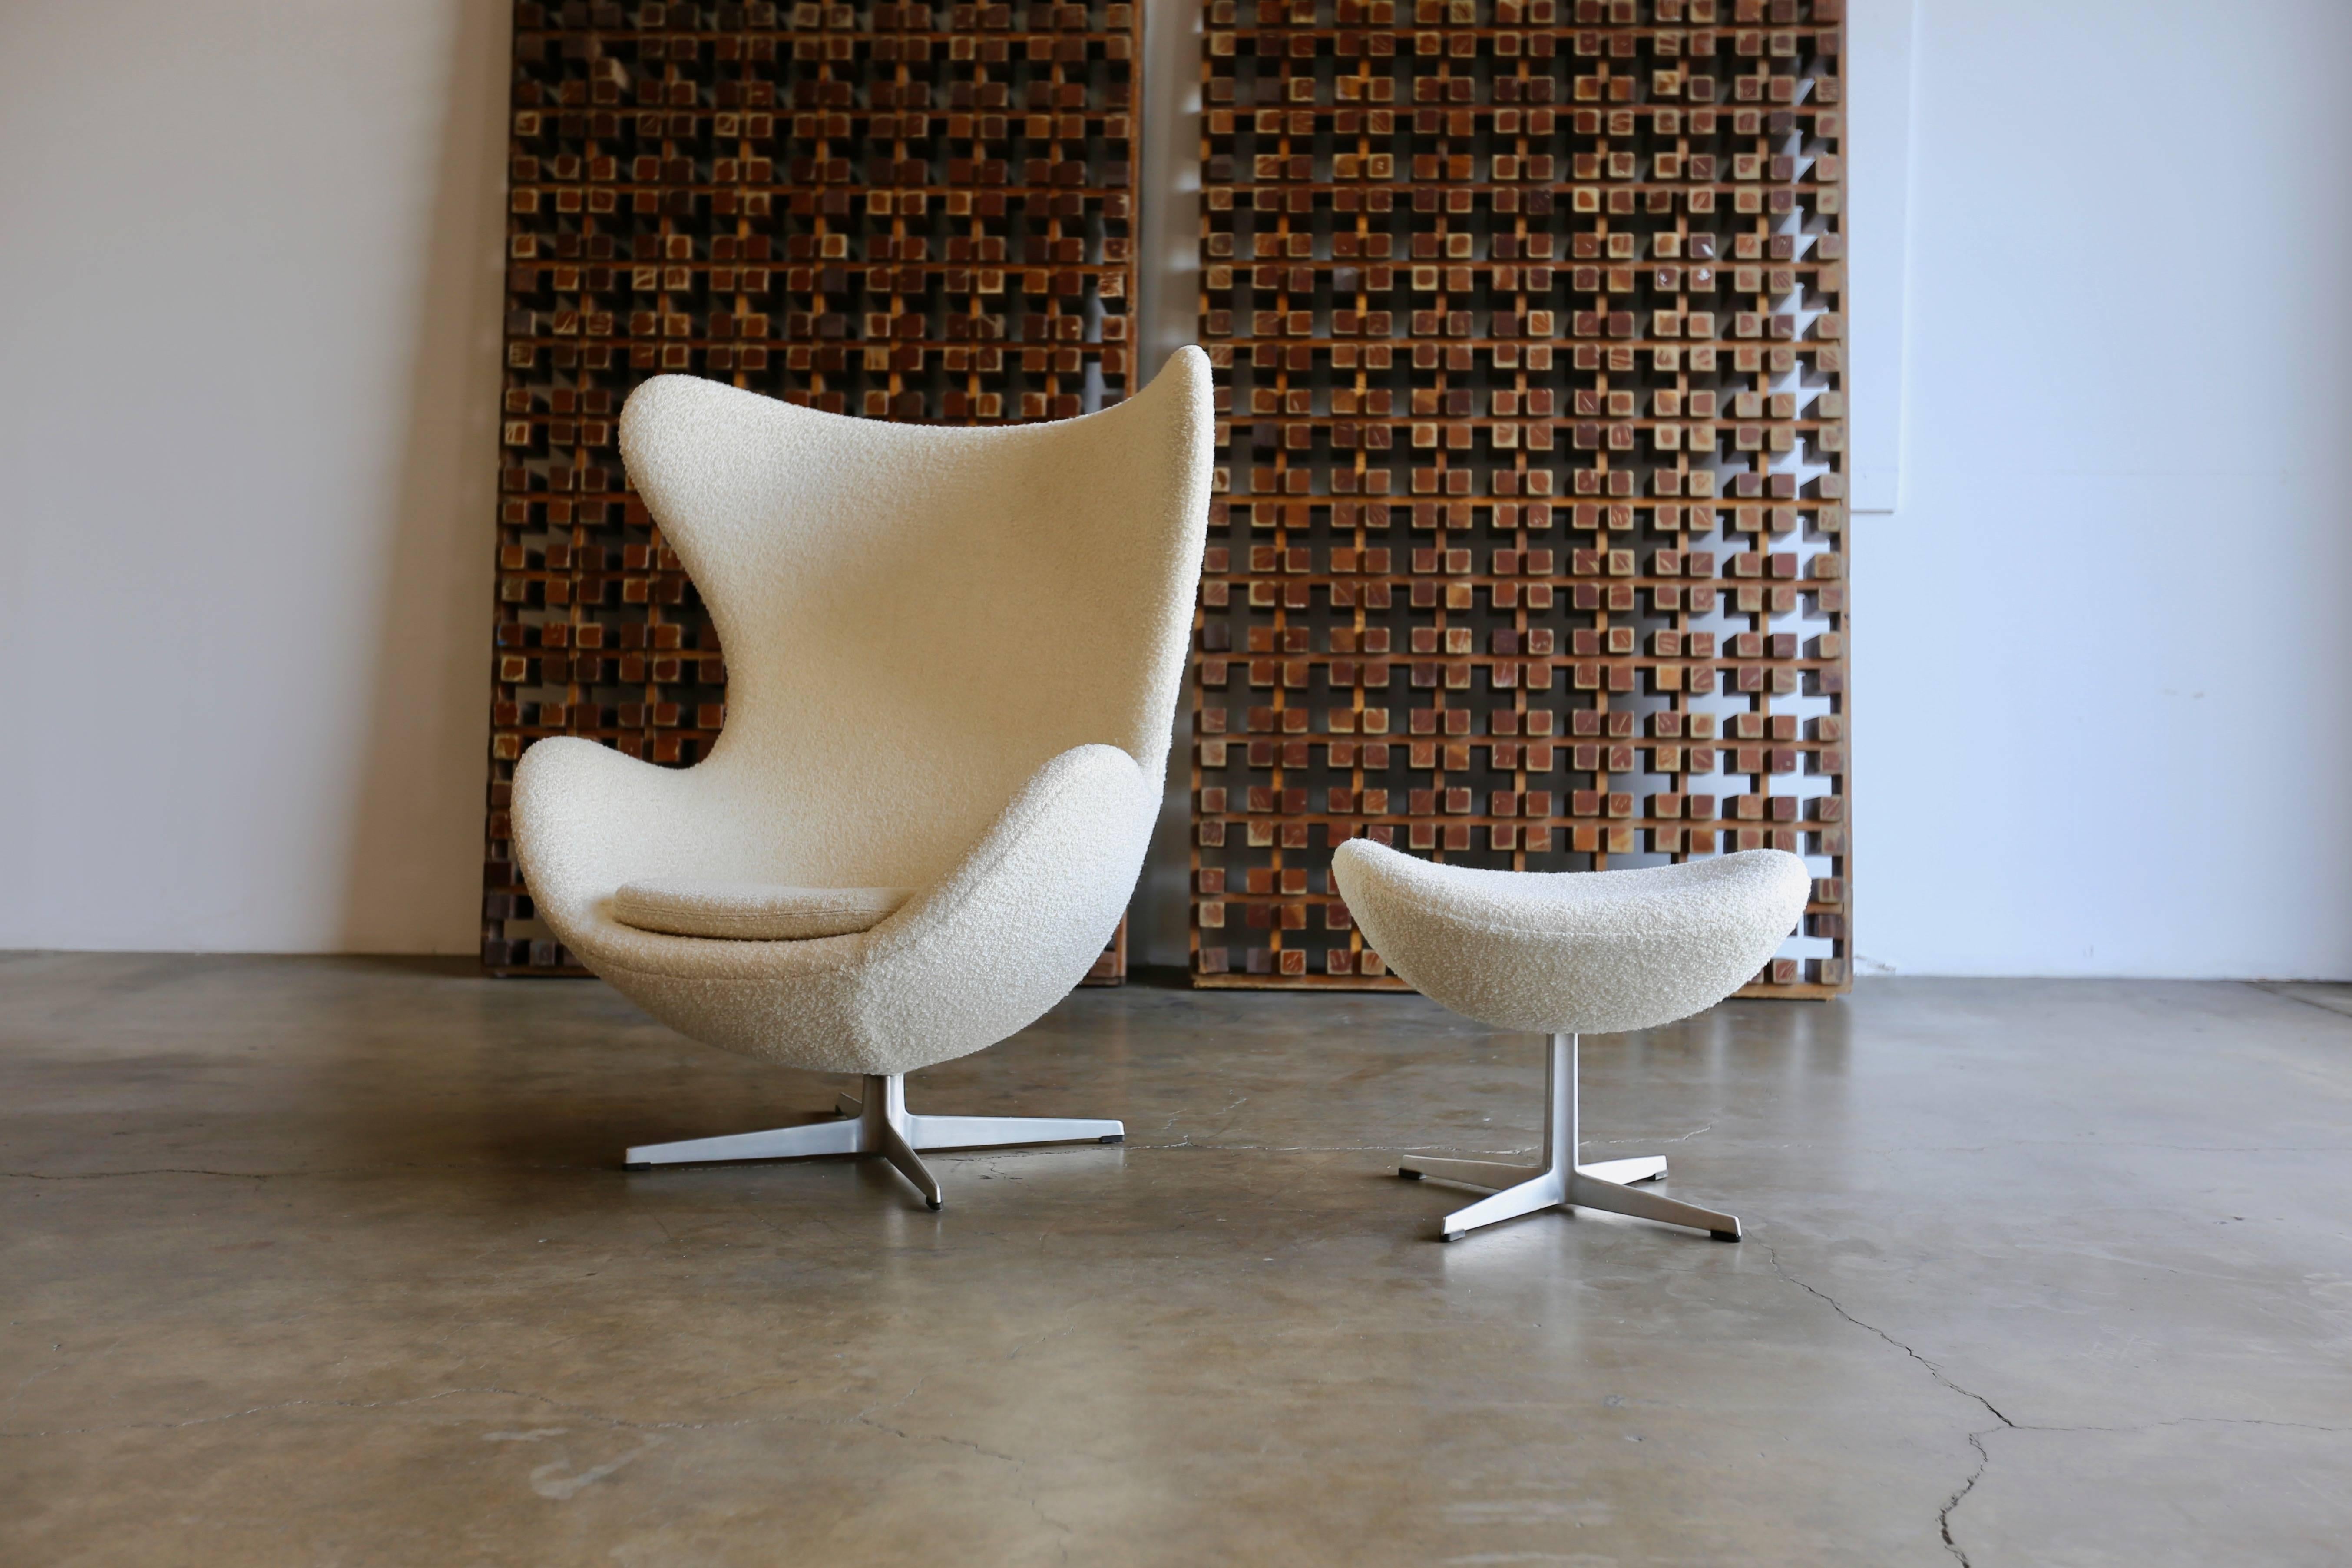 Egg chair and ottoman by Arne Jacobsen for Fritz Hansen. This chair and ottoman has been upholstered in a nubby cream colored boucle. The chair retains the original Fritz Hansen label to the base.